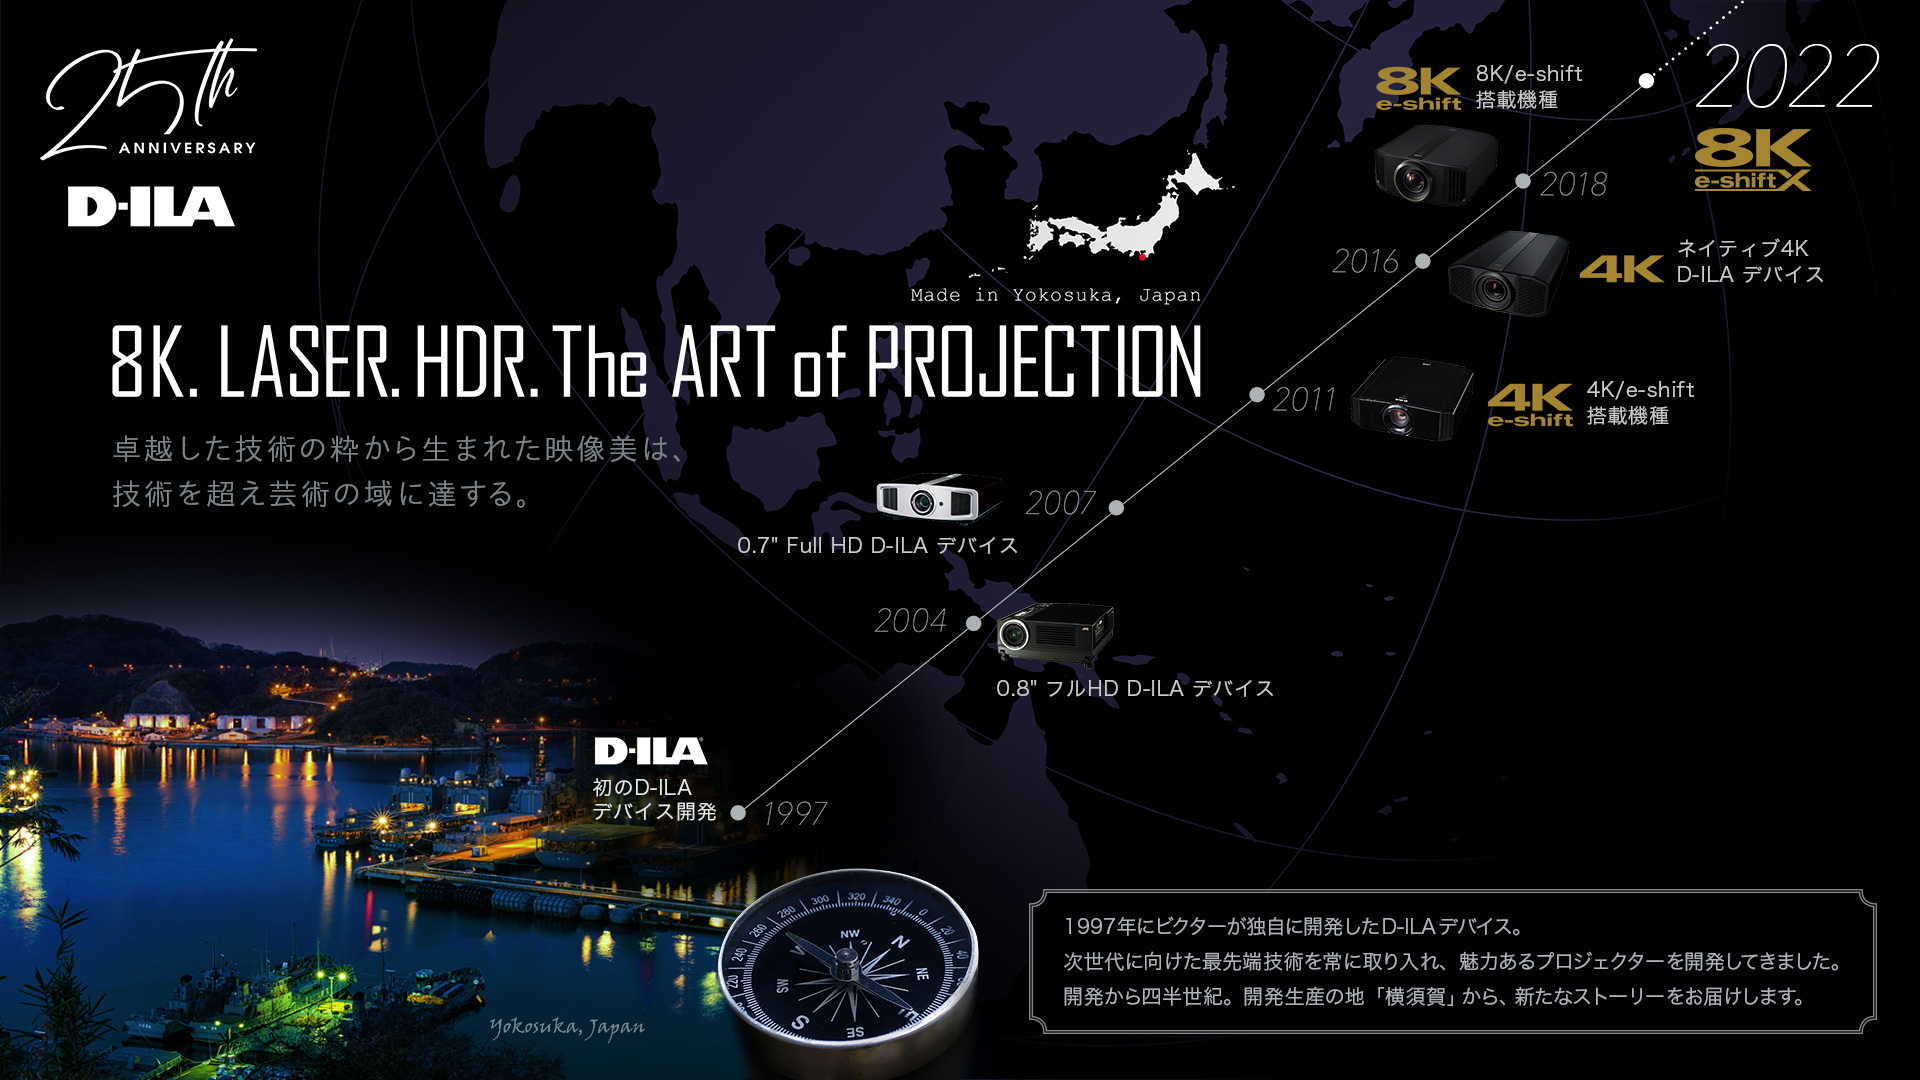 8K. LASER. HDR. The ART of PROJECTION